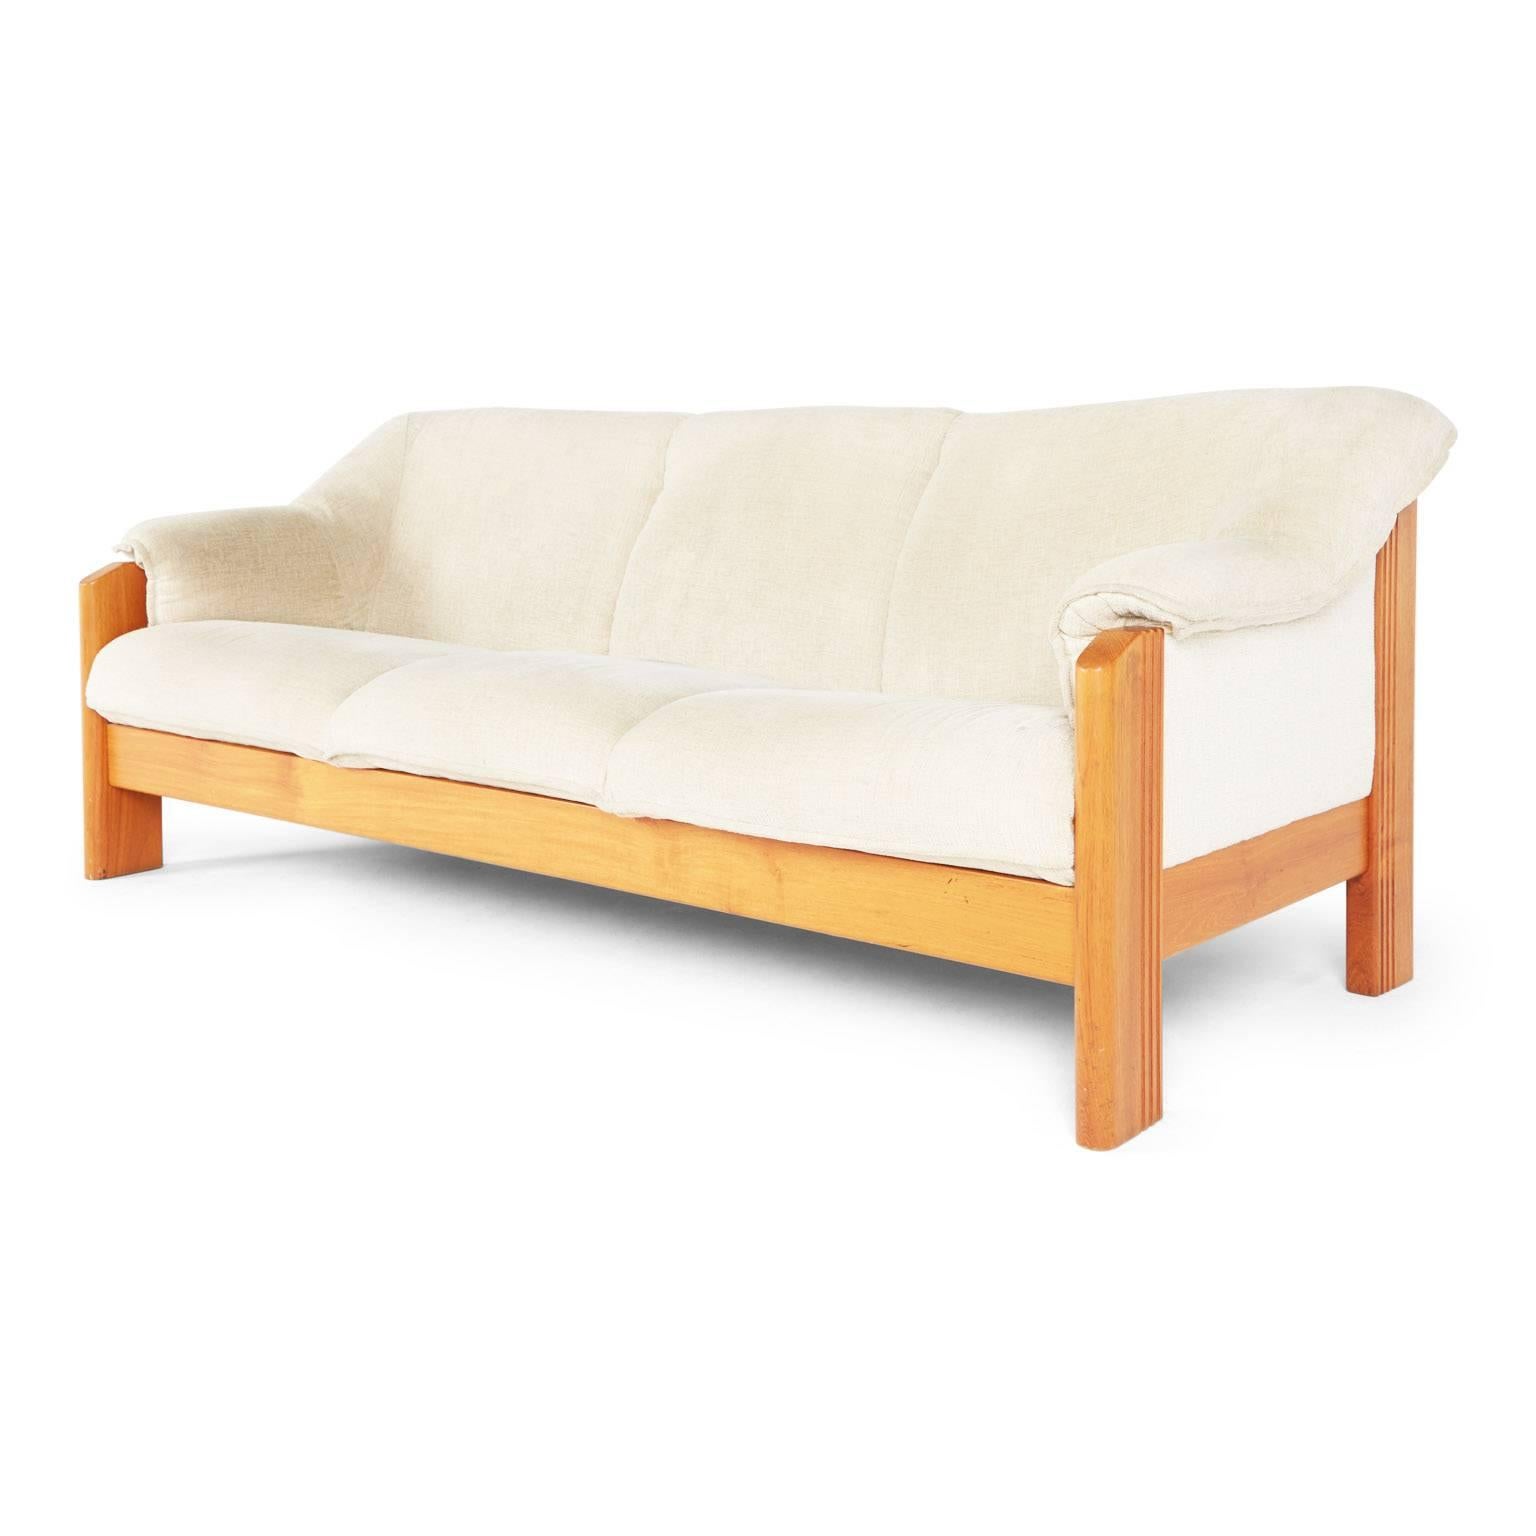 Three-seat sofa with solid Norwegian teak frame and original textured vintage fabric produced by J.E. Ekornes, one of Norway's leading furniture manufacturers. The gently organic design of this piece is both comfortable and supportive, perfect for